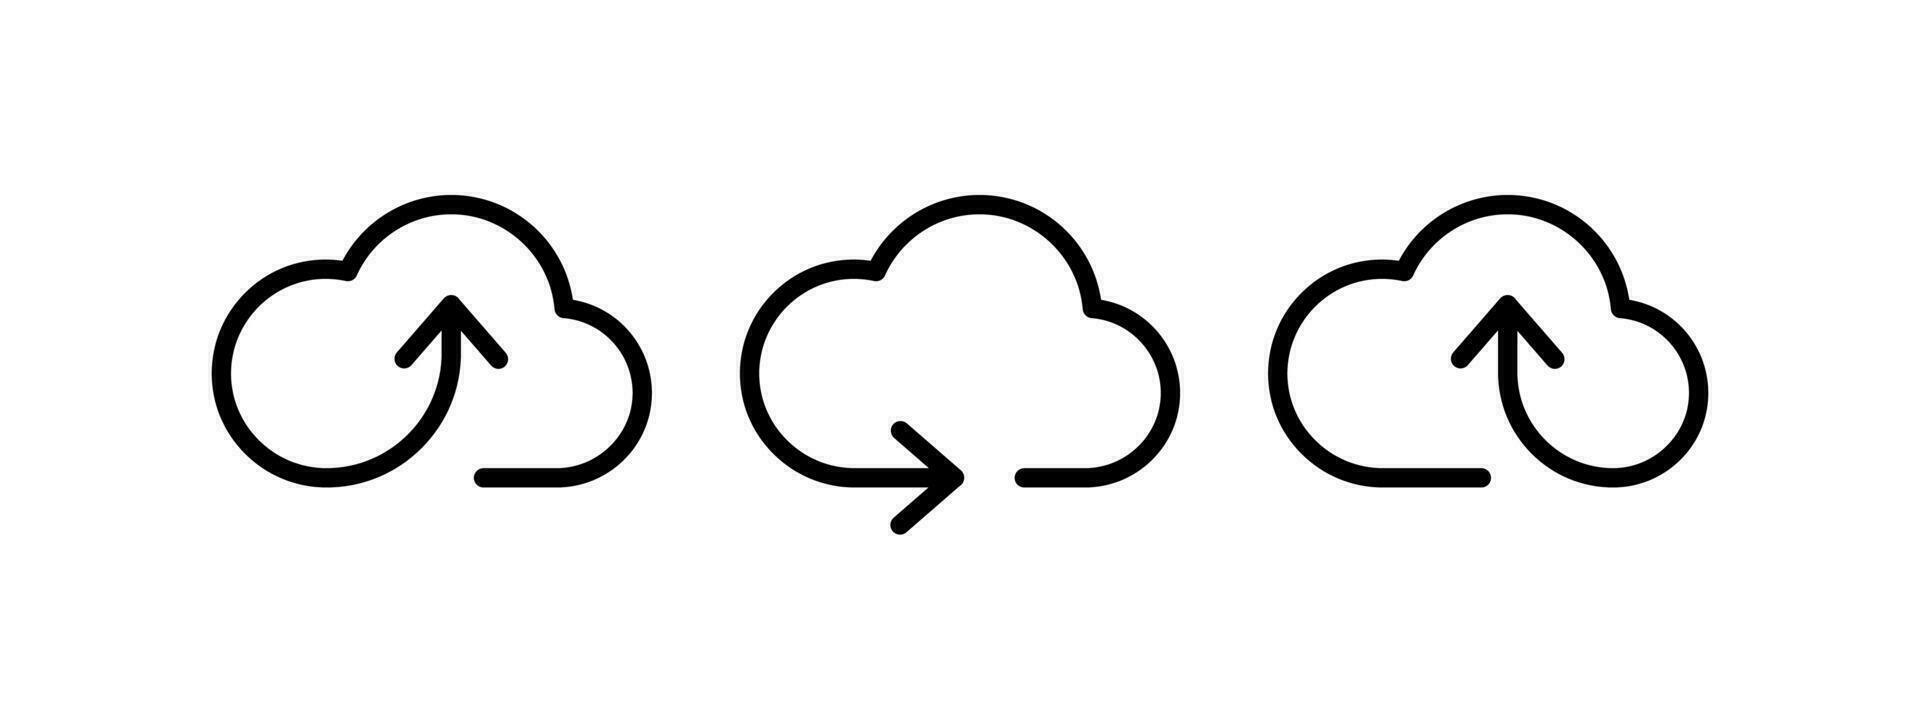 Cloud icons. Clouds with arrows. Vector icons